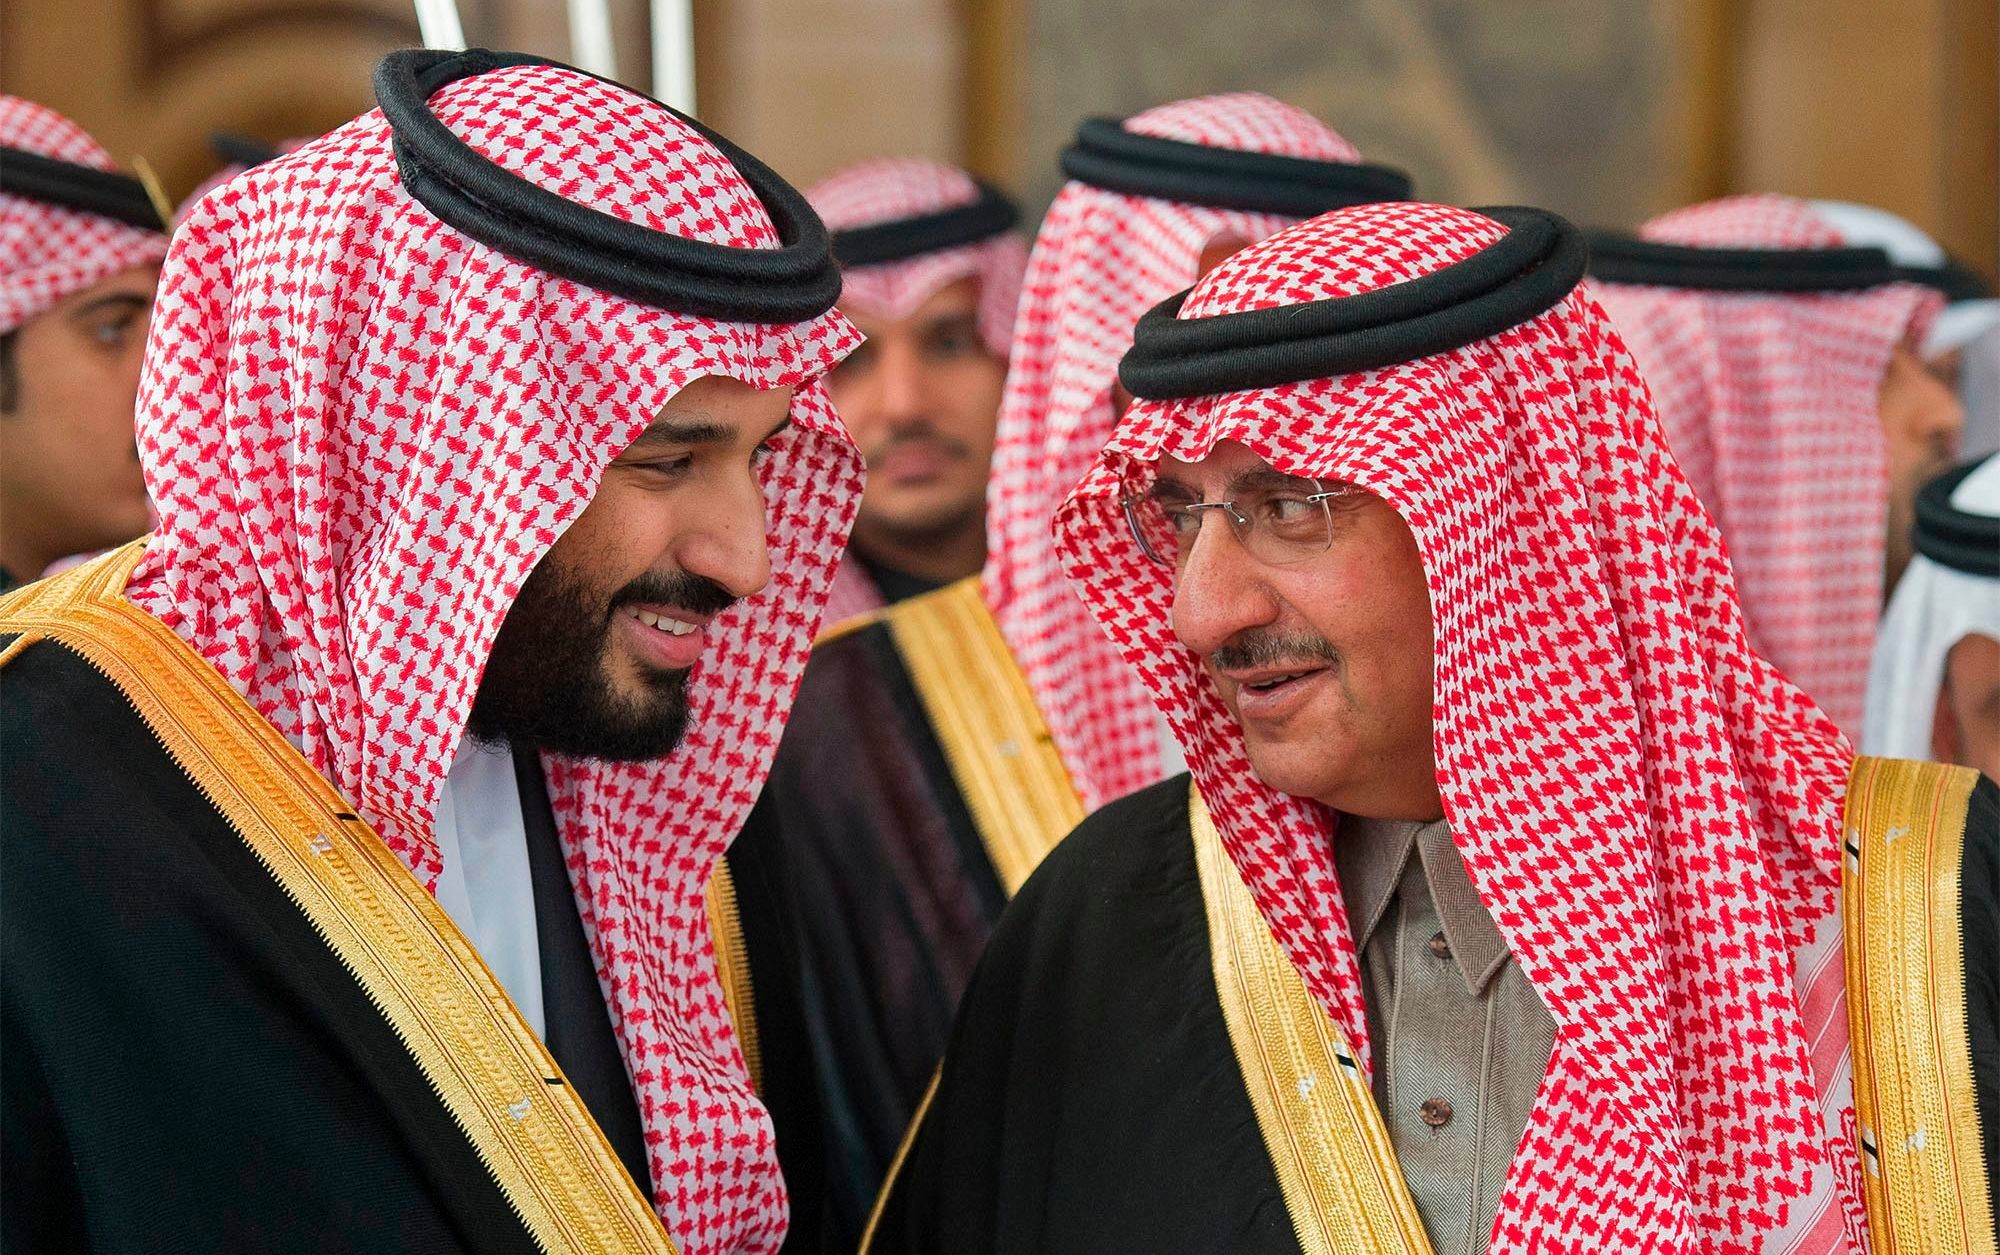 Roundup of Saudi Royals Expands With Detention of a 4th Prince